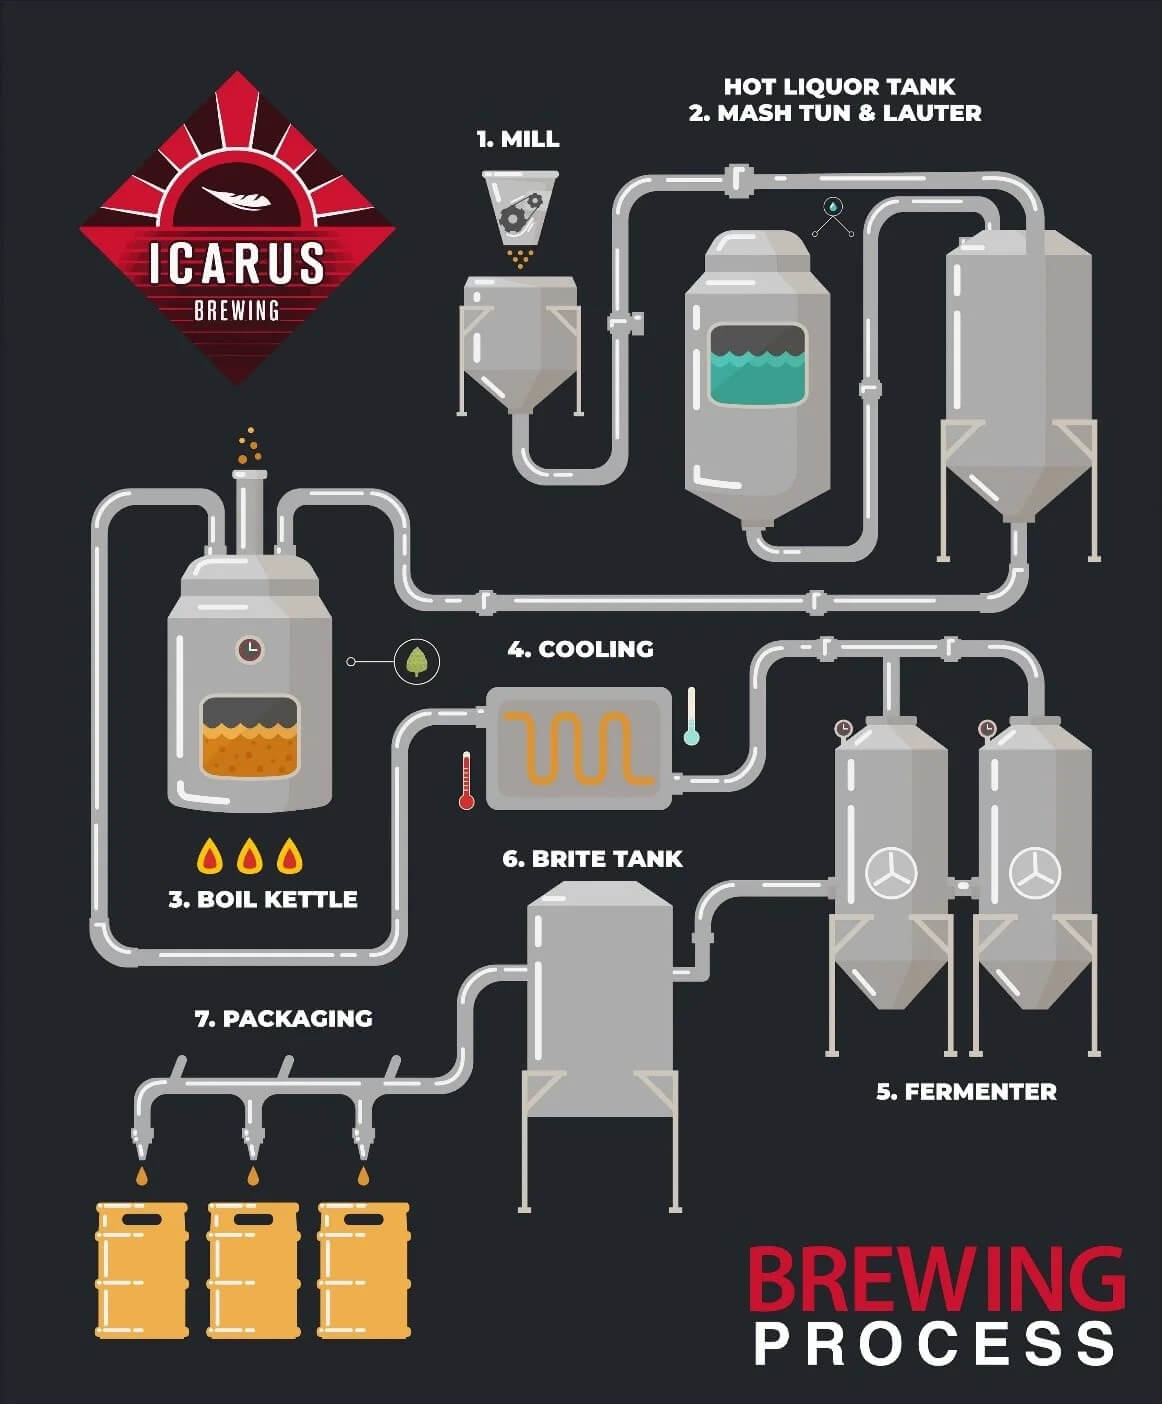 Icarus Brewing process infographic